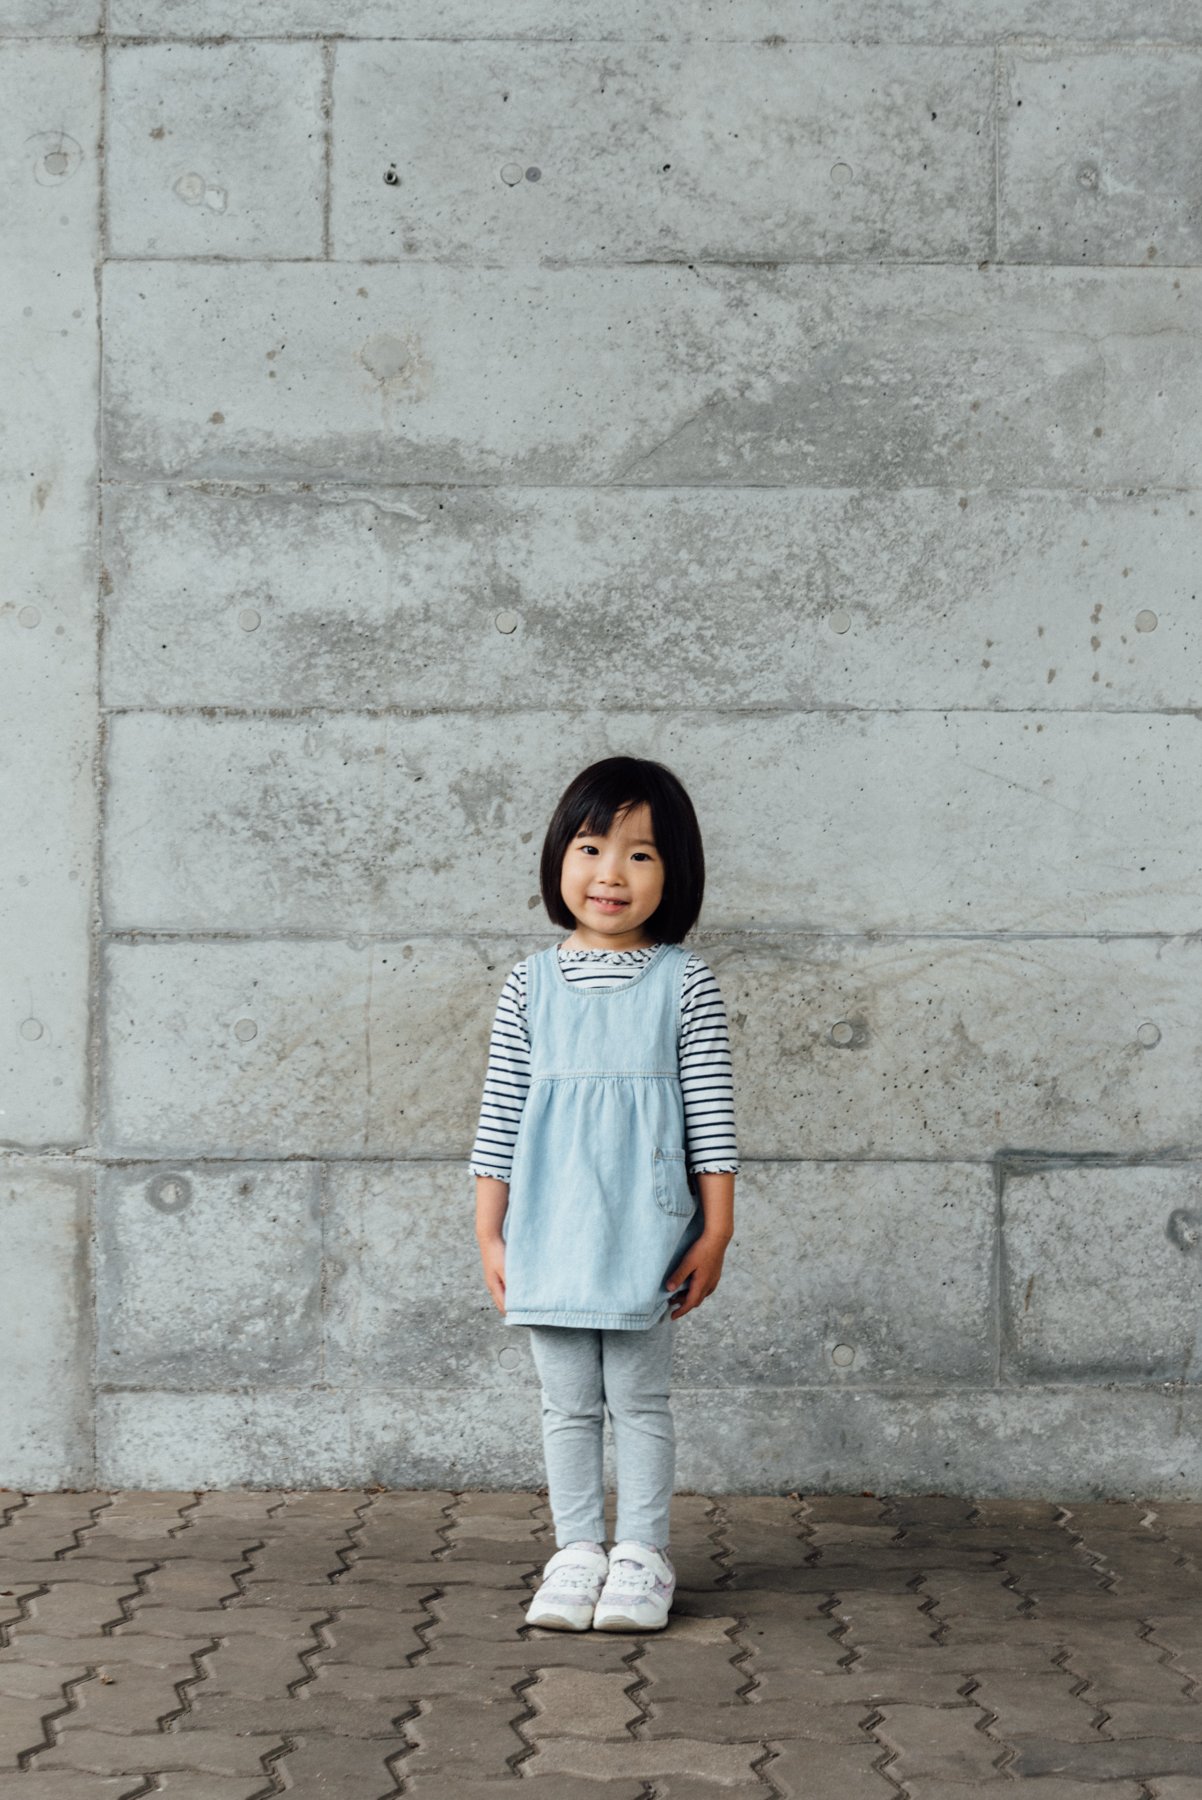  T-shirt:  95% COTTON 5% POLYURETHANE  Dress:  100% COTTON   “She has been wearing the her sister's hand-me-downs for a long time. They are now small in size and old, so they will be discard." (Mother)    Tシャツ： 綿　95% ポリウレタン　5%  ワンピース： 綿100%  「お姉ちゃんのお